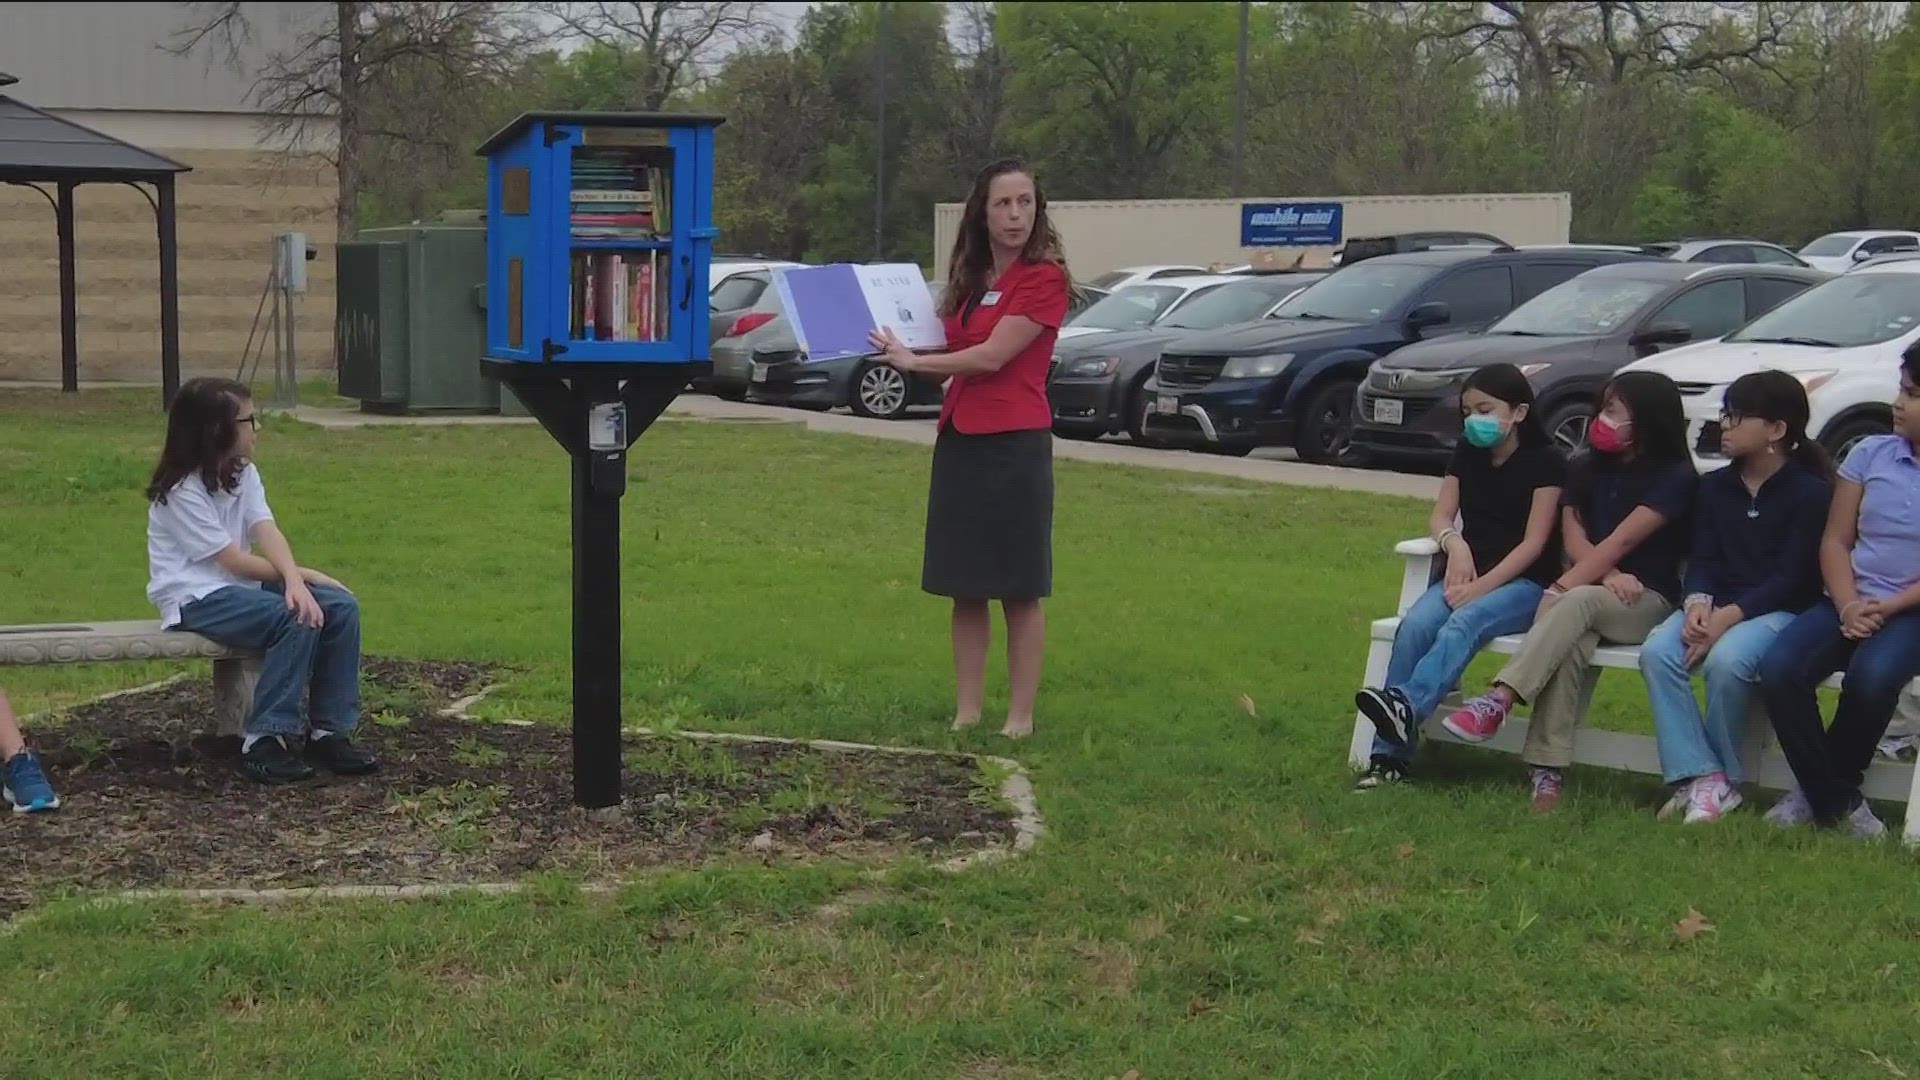 The little library aims to help increase students' access to books and increase literacy.